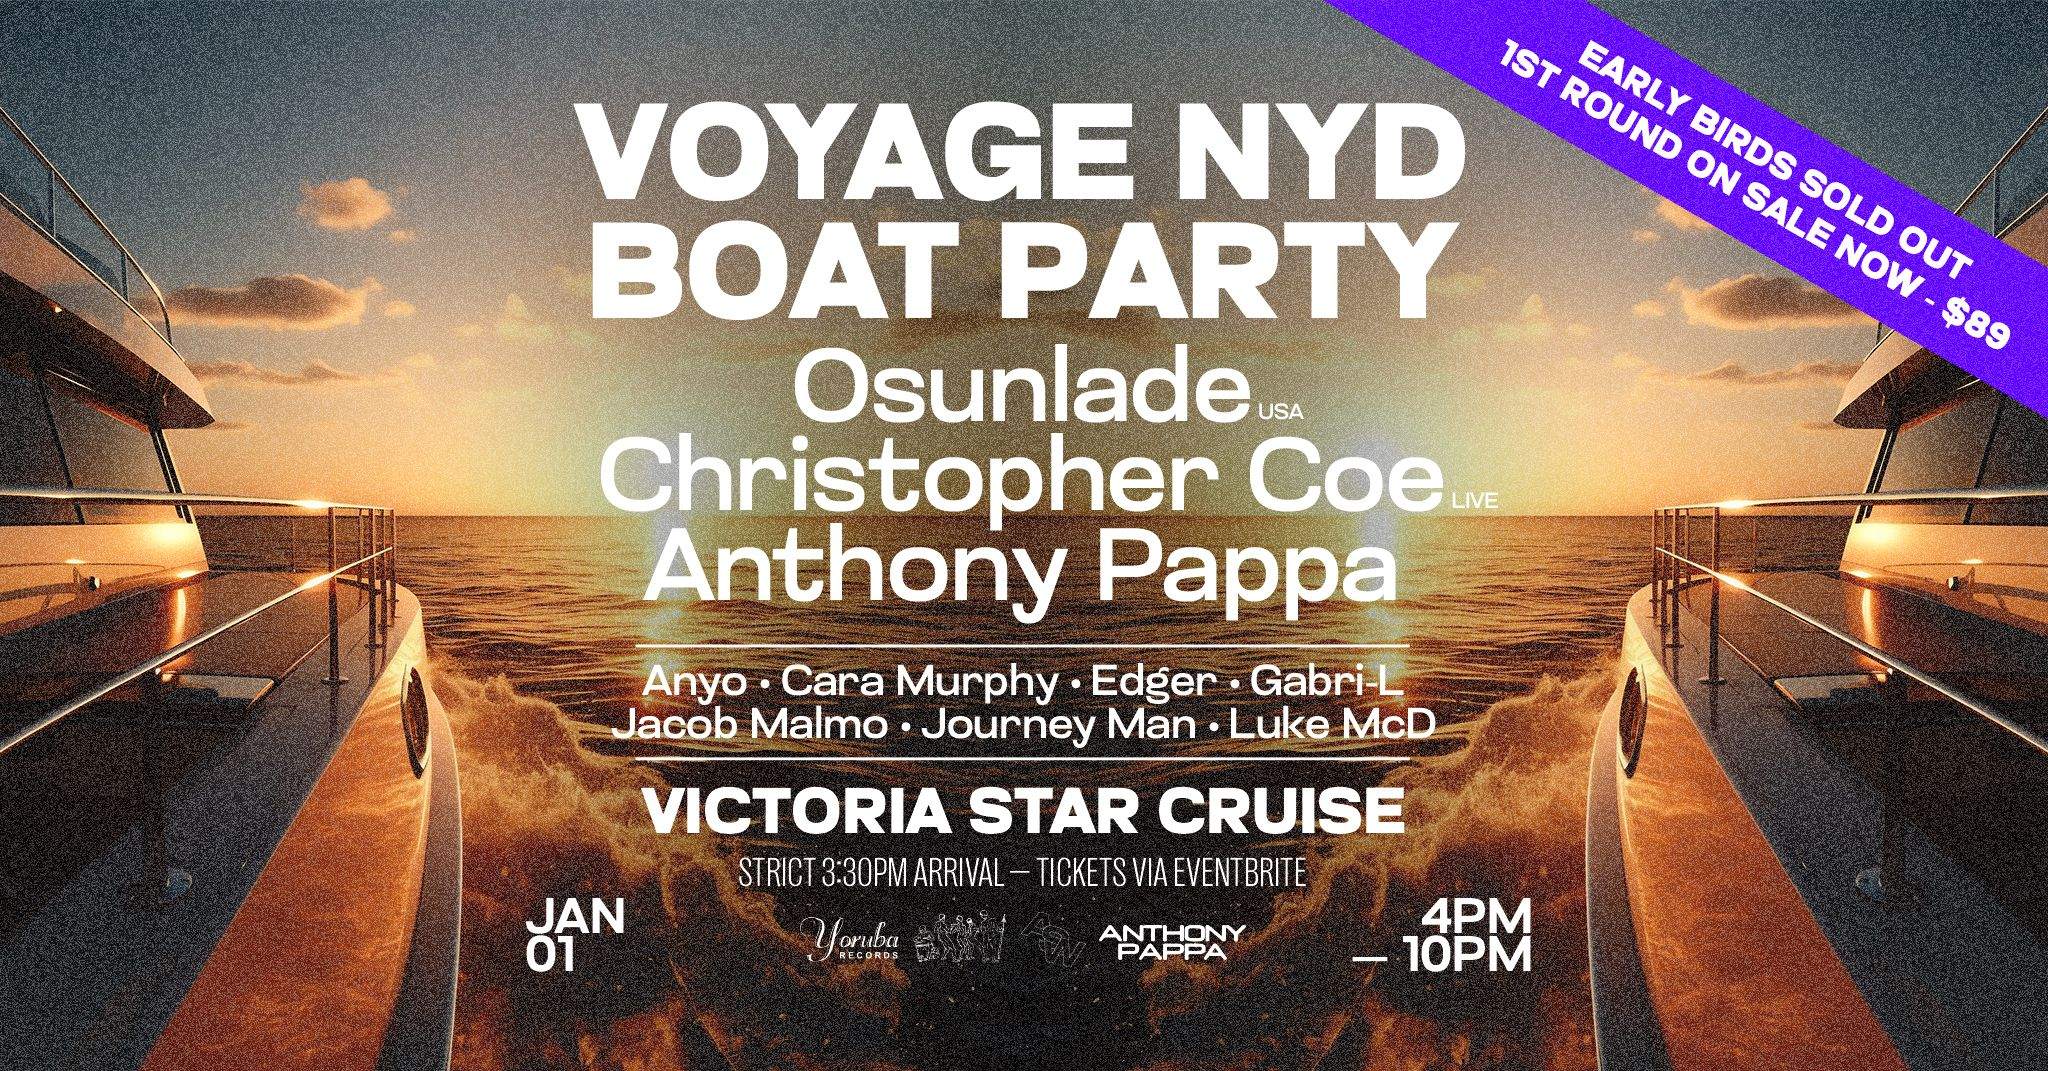 Voyage NYD feat. Osunlade (USA), Christopher Coe (LIVE), Anthony Pappa - Página frontal